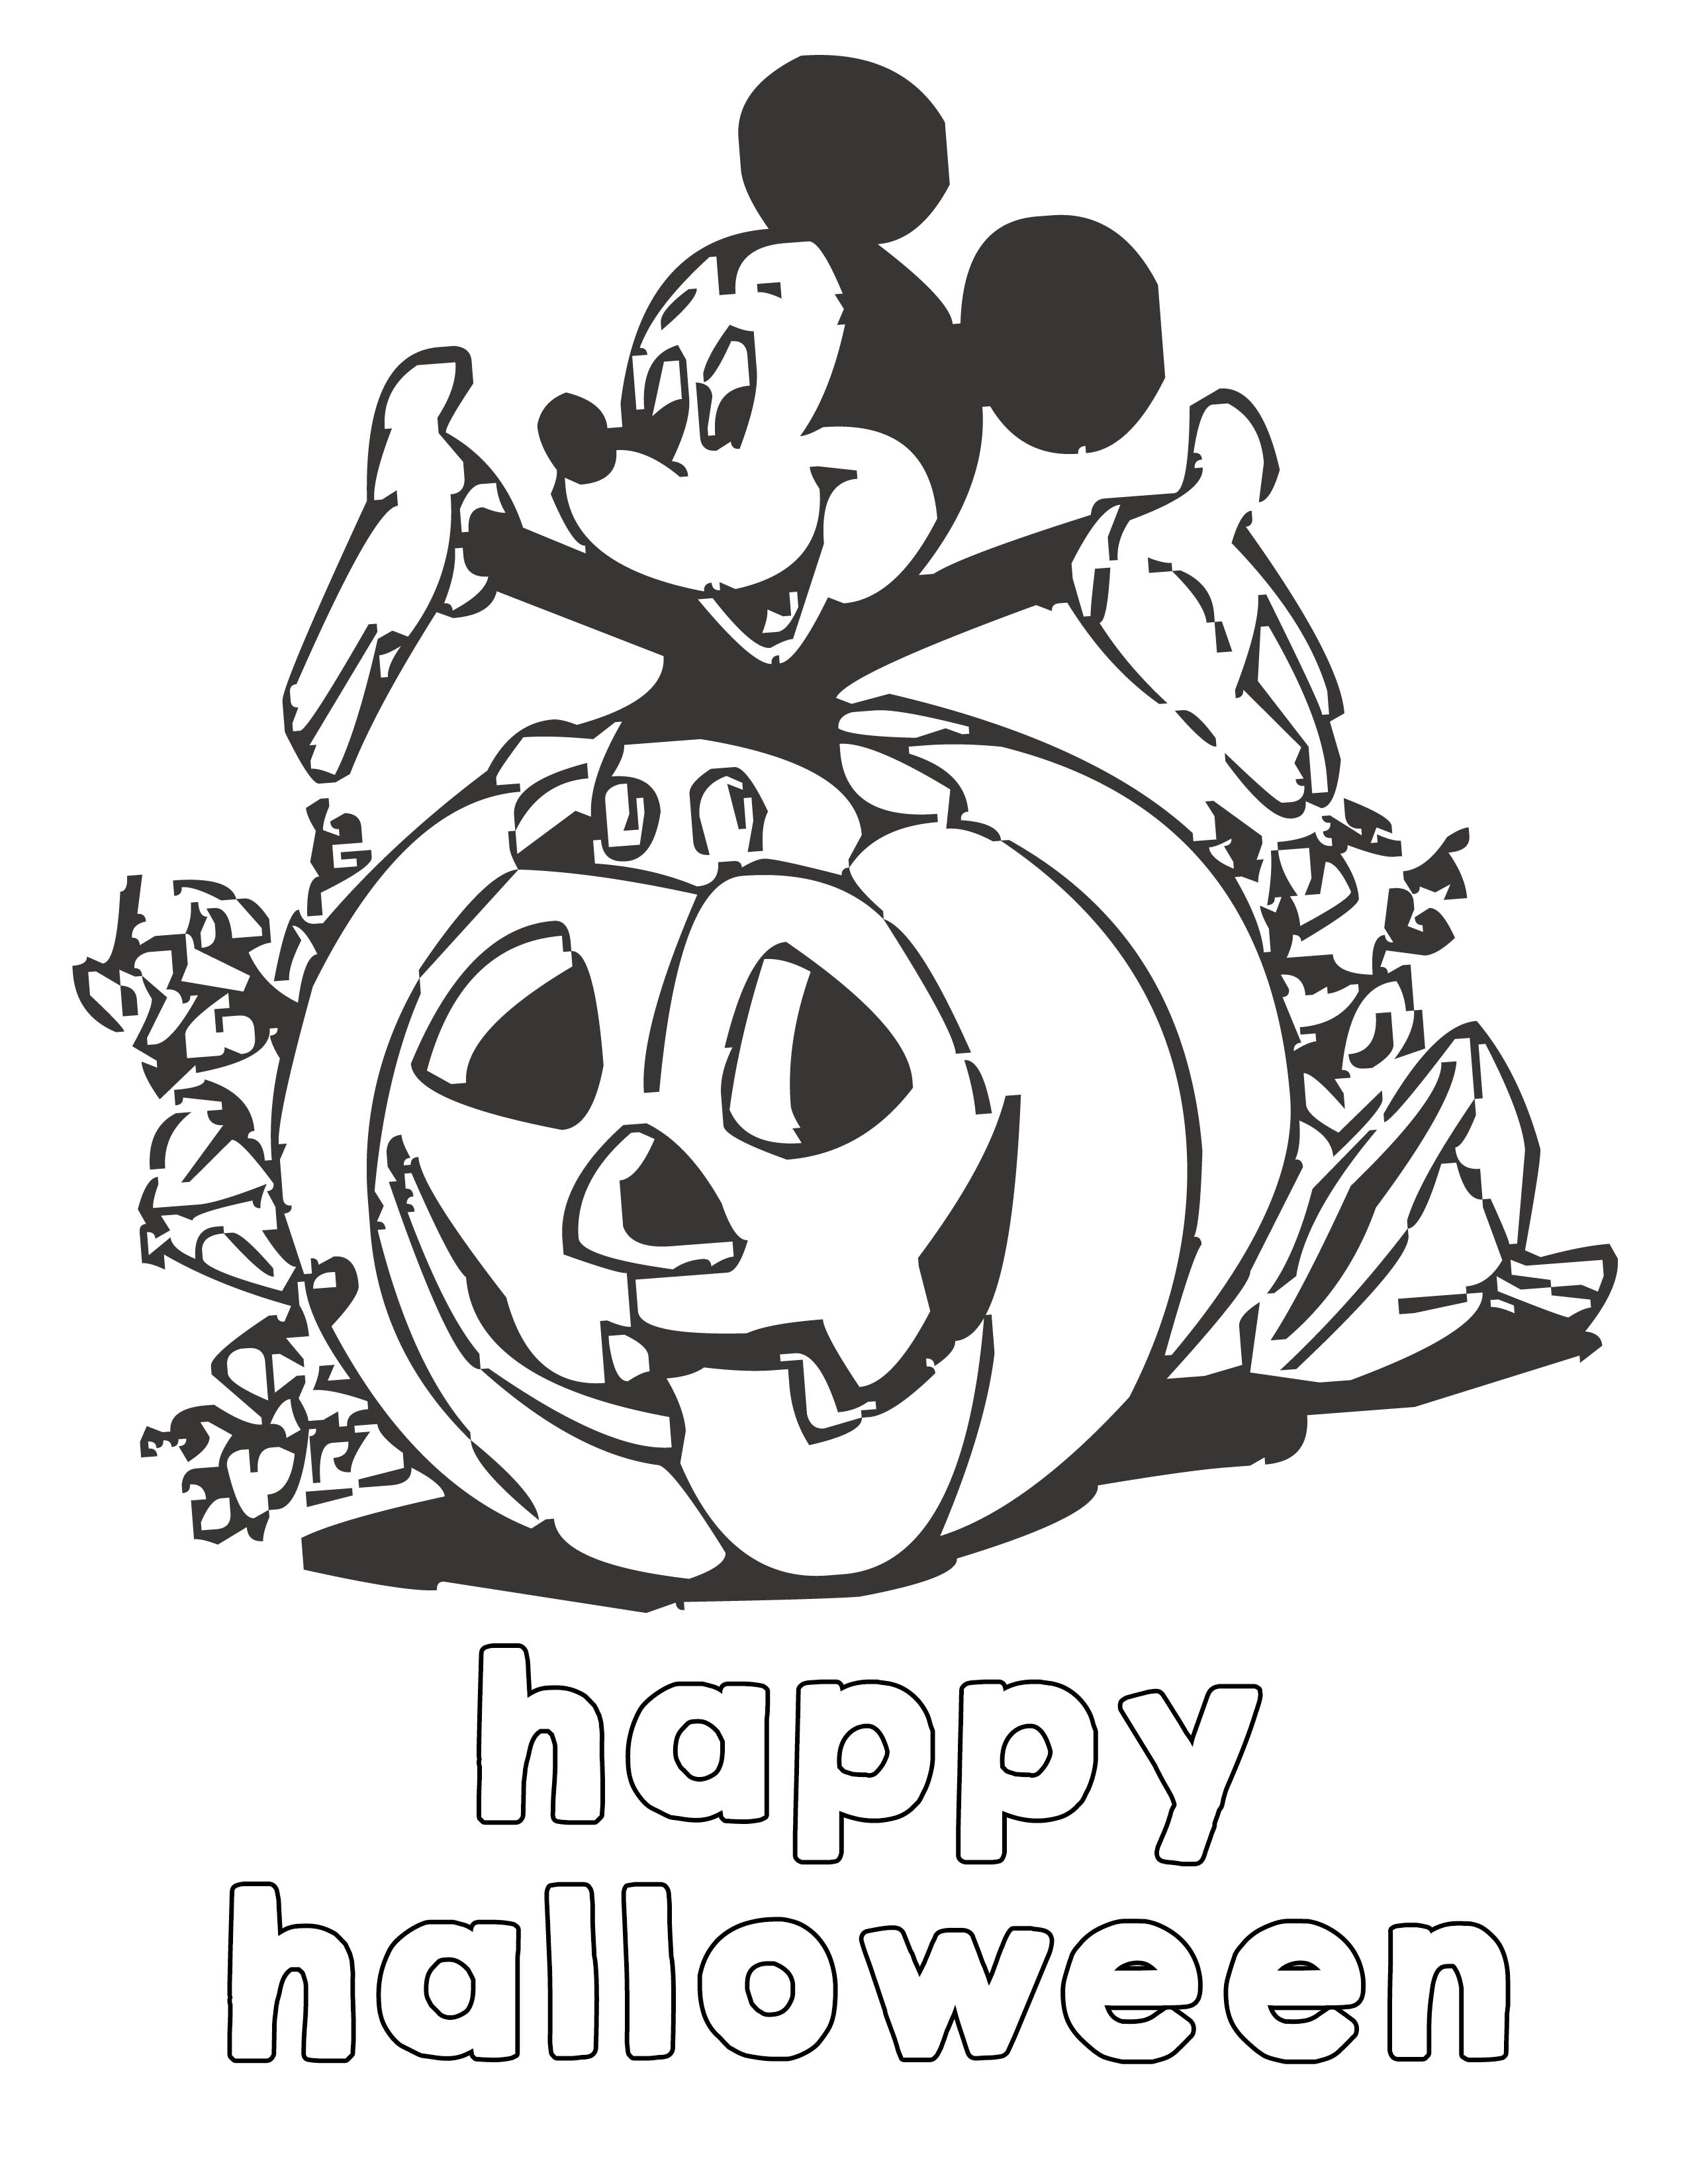 Halloween Coloring Pages -Mickey Mouse Halloween- free printable coloring pages for kids - Misty Nelson @frostedevents